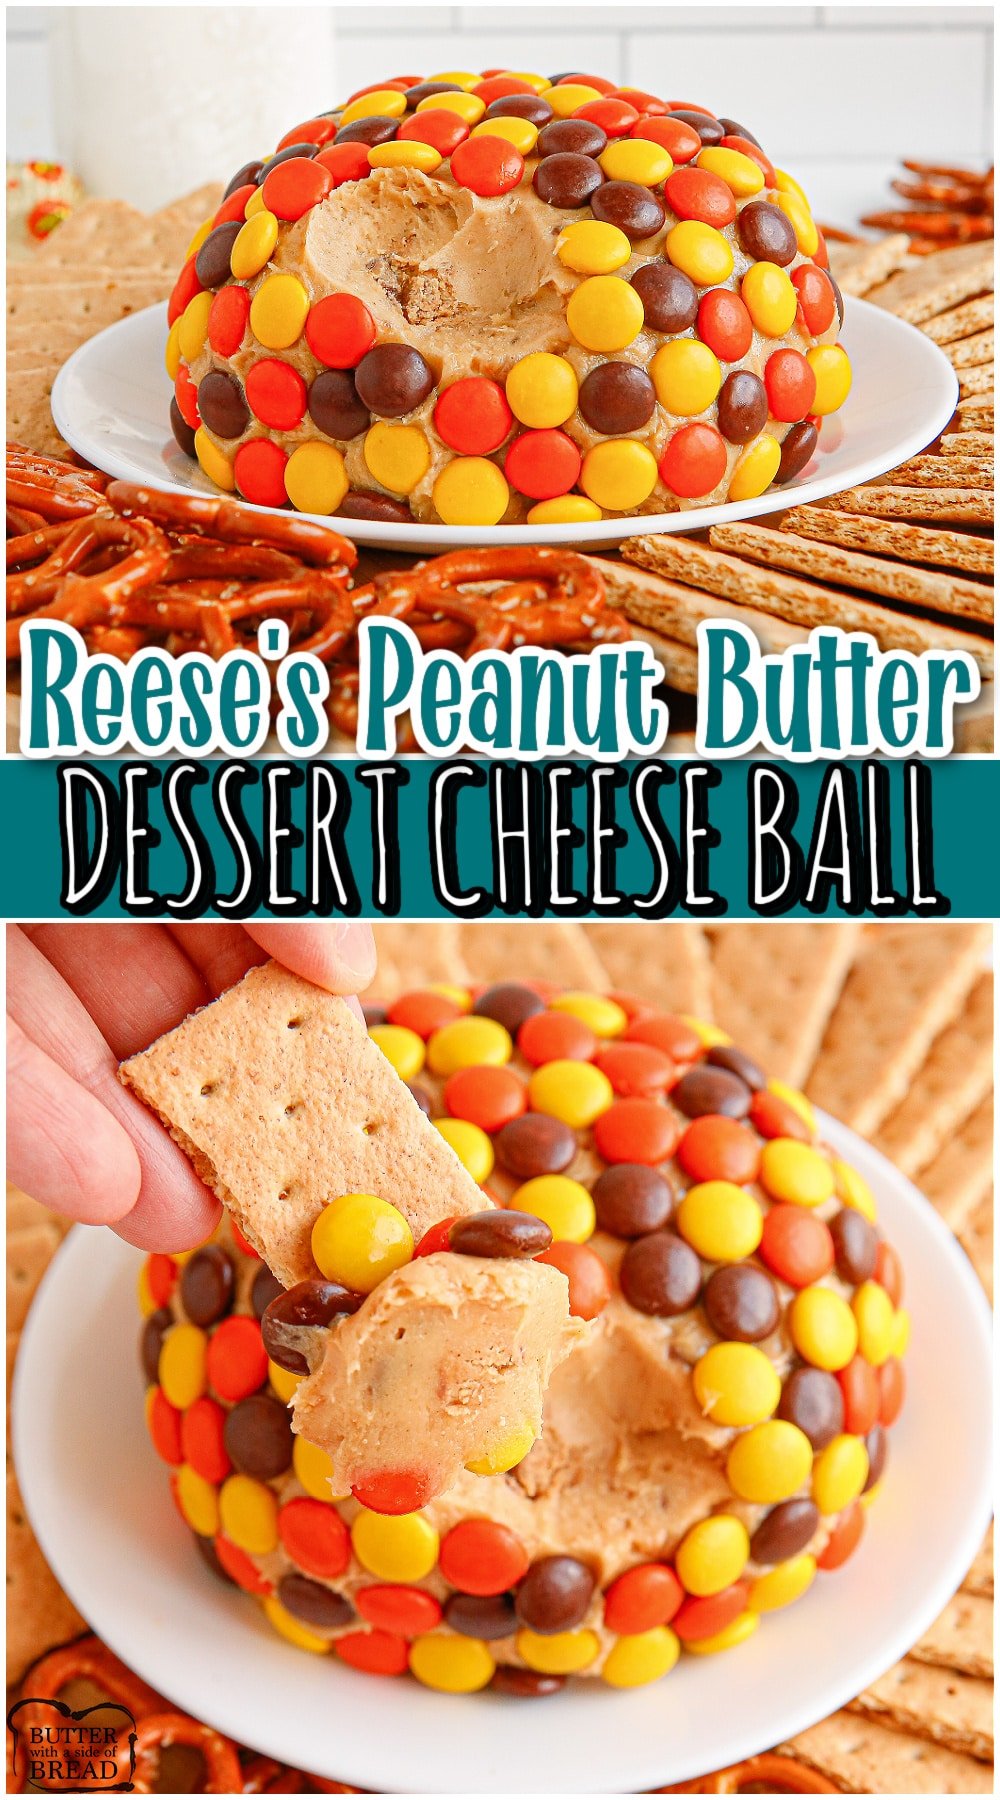 Reese's Dessert Cheese Ball perfect for parties & delicious served with pretzels, apples, graham crackers & Nilla Wafers! Festive peanut butter cheese ball topped with Reese's Pieces everyone loves!